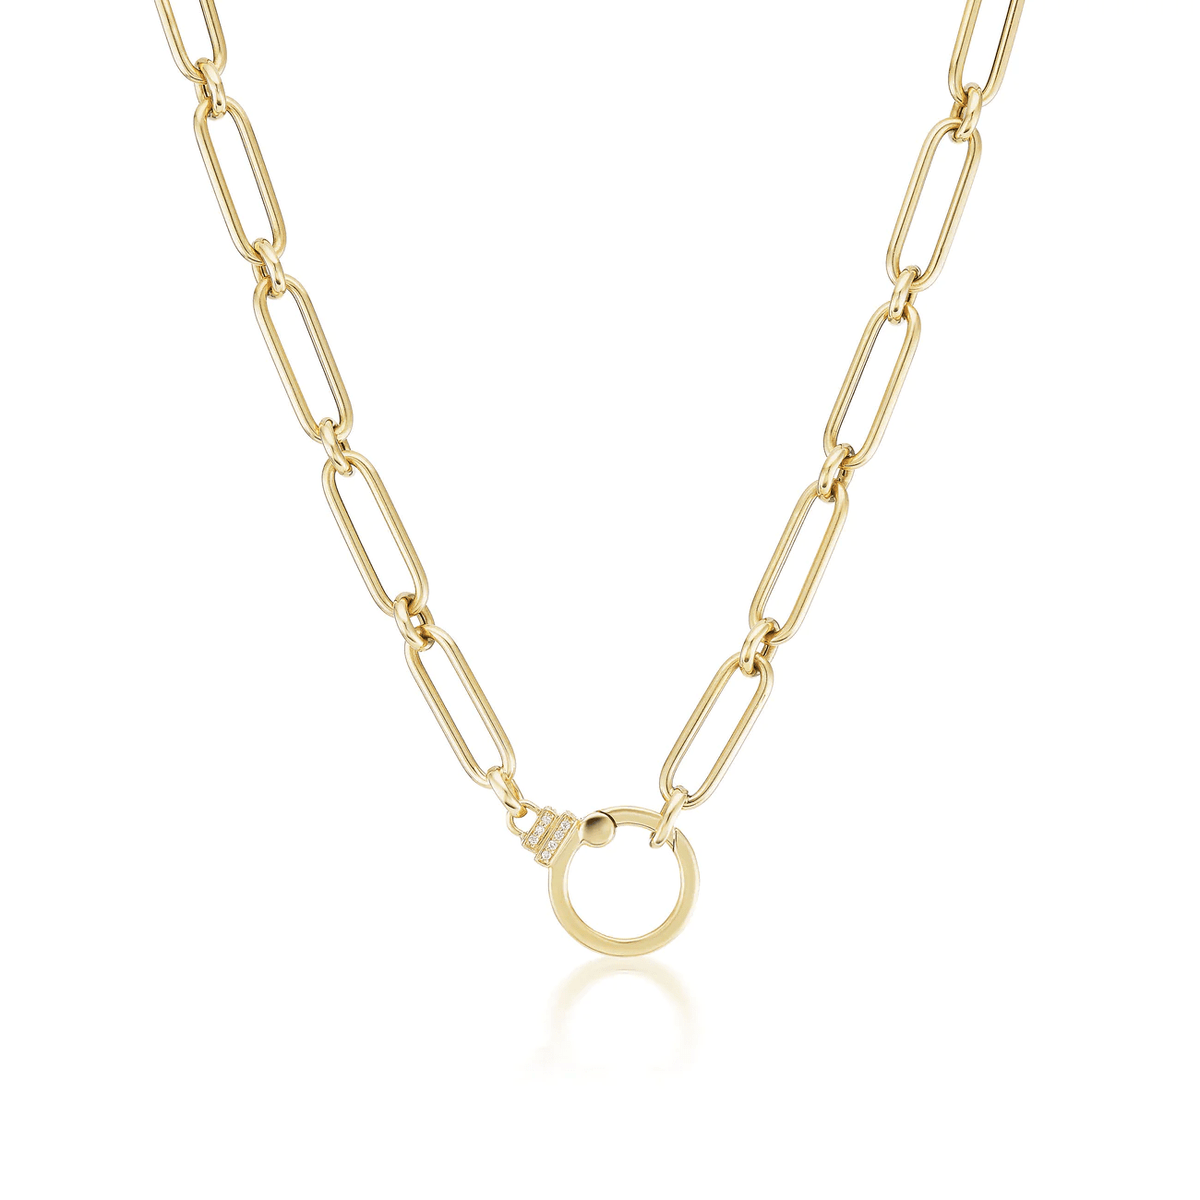 18K Yellow Gold Link with Enhancer Clip Chain